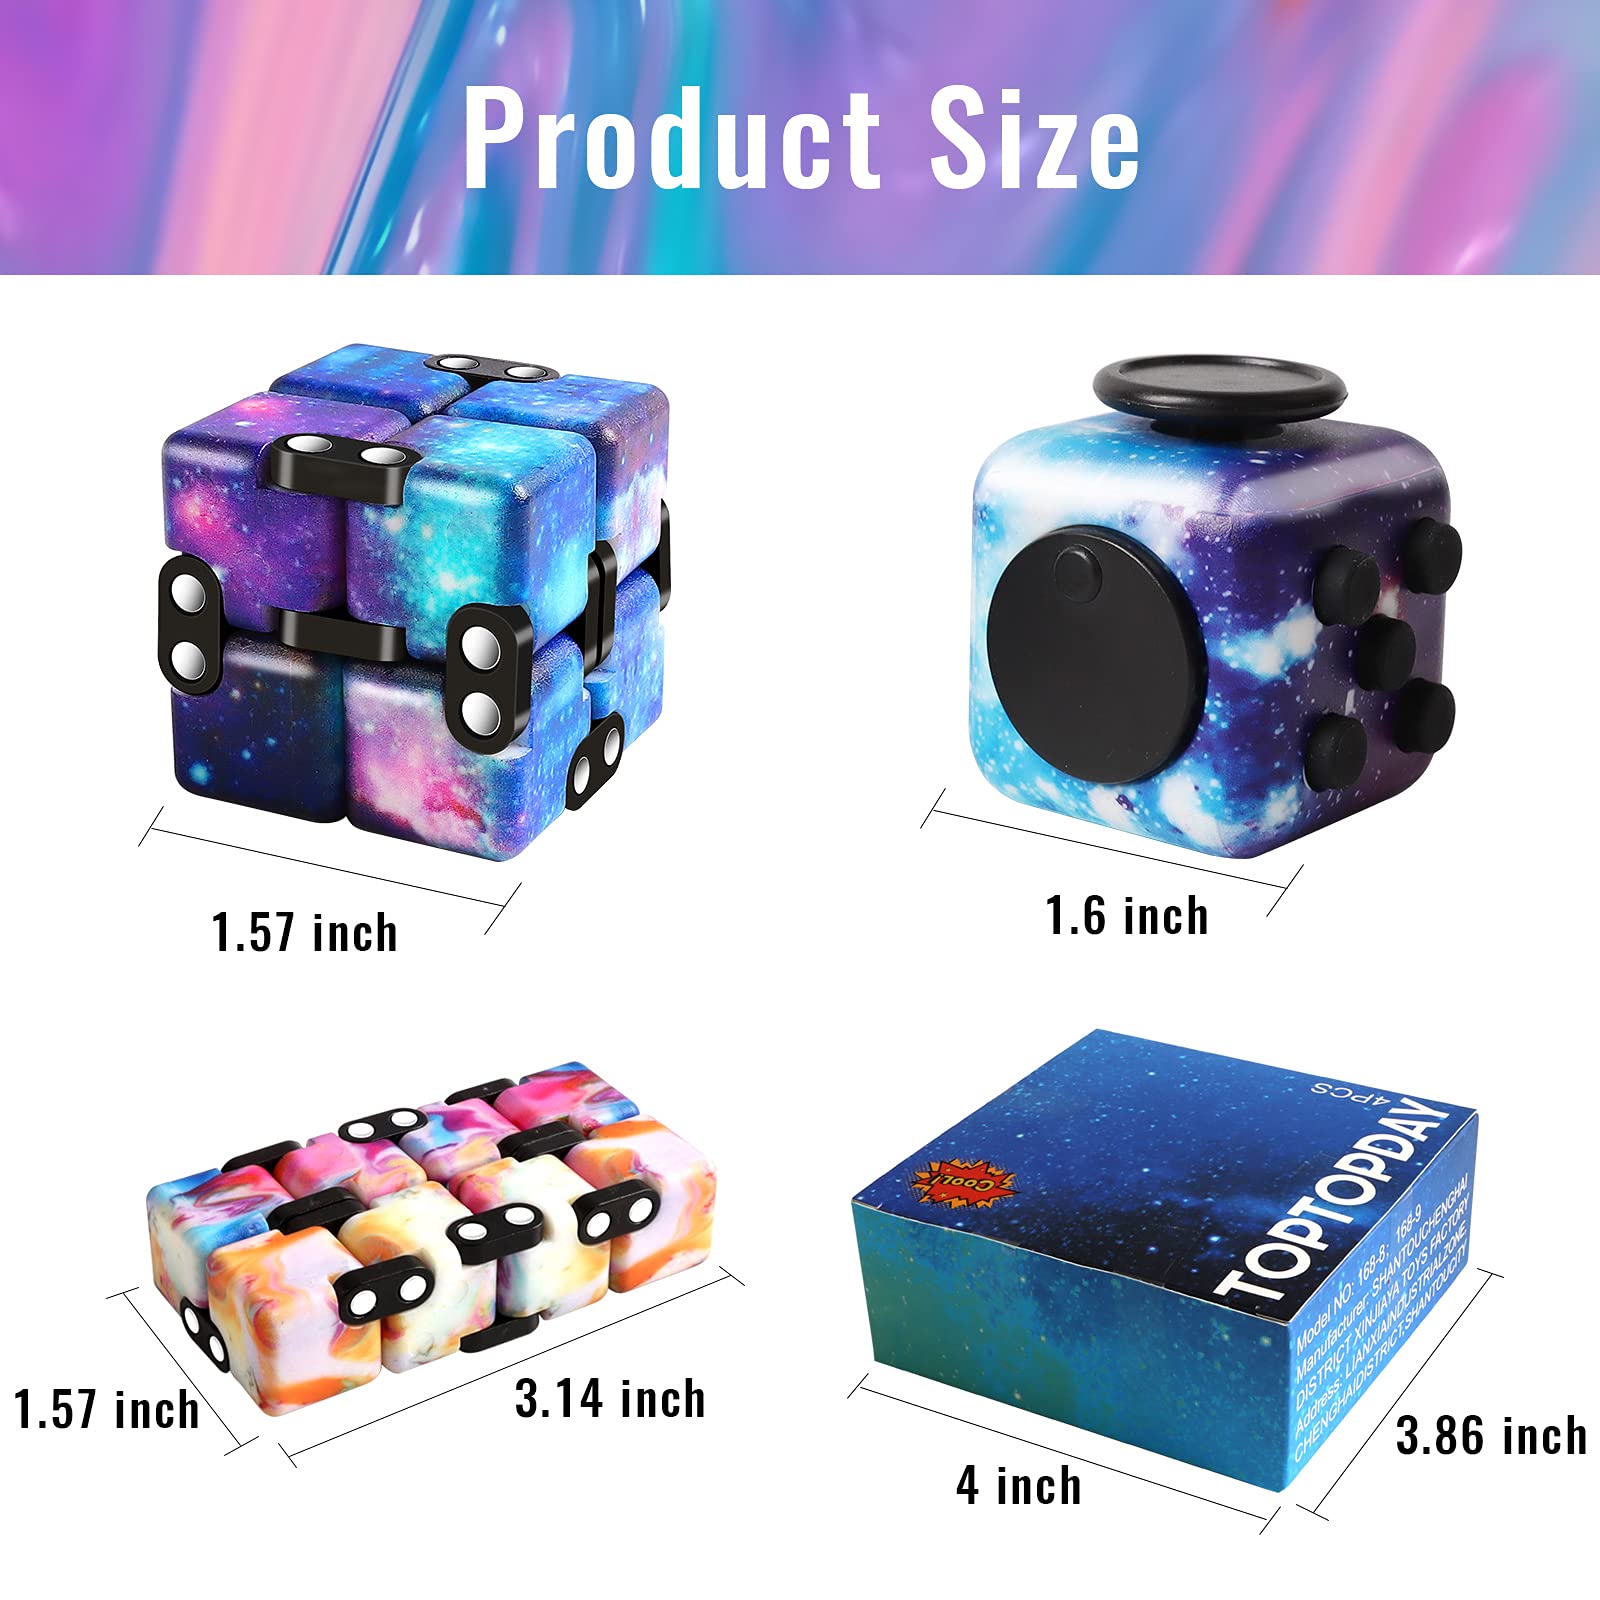 Infinity Cube and Fidget Cube, 4 Pieces Fidget Toys for Adults Kids Boys Girls Gift, Cute Mini Unique Gadget Toy, Relieve Stress, Reduce Anxiety Fidget Cube Game for ADHD, OCD, Autism and Kill Time